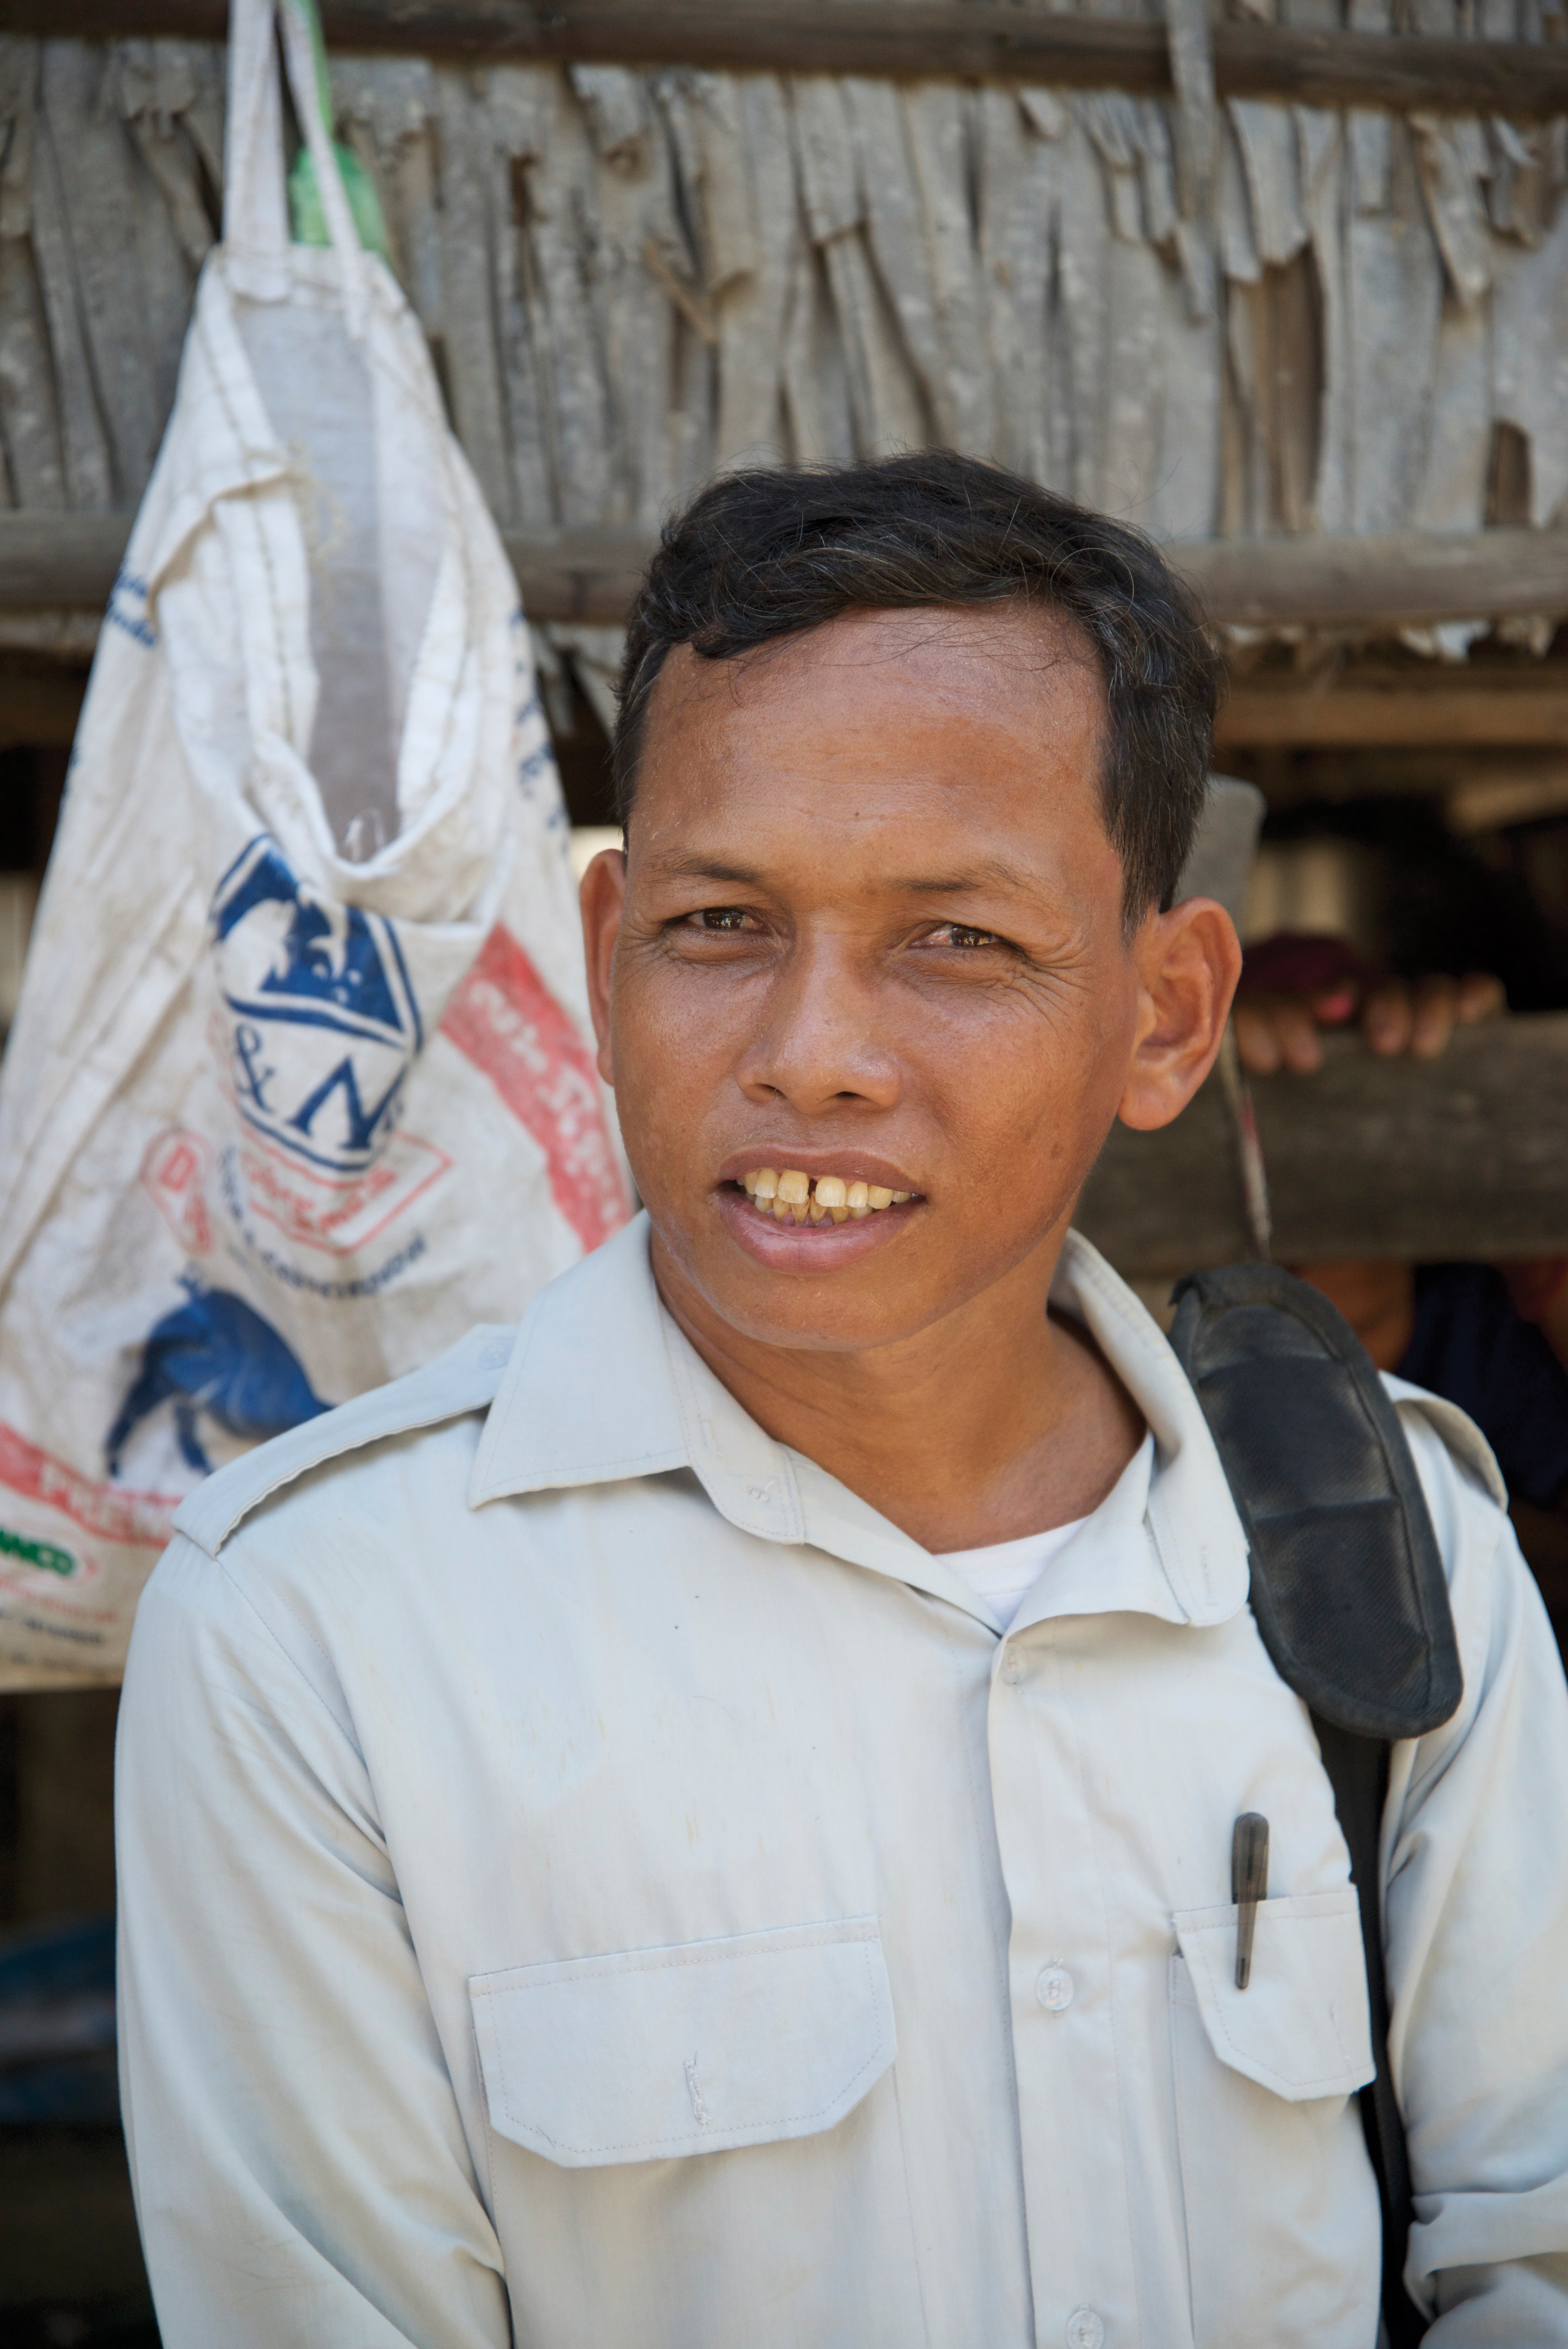 Loan Leang, above, has been a community development officer, child advocate and veterinarian for Holt’s on-the-ground partner in Cambodia since 2003.